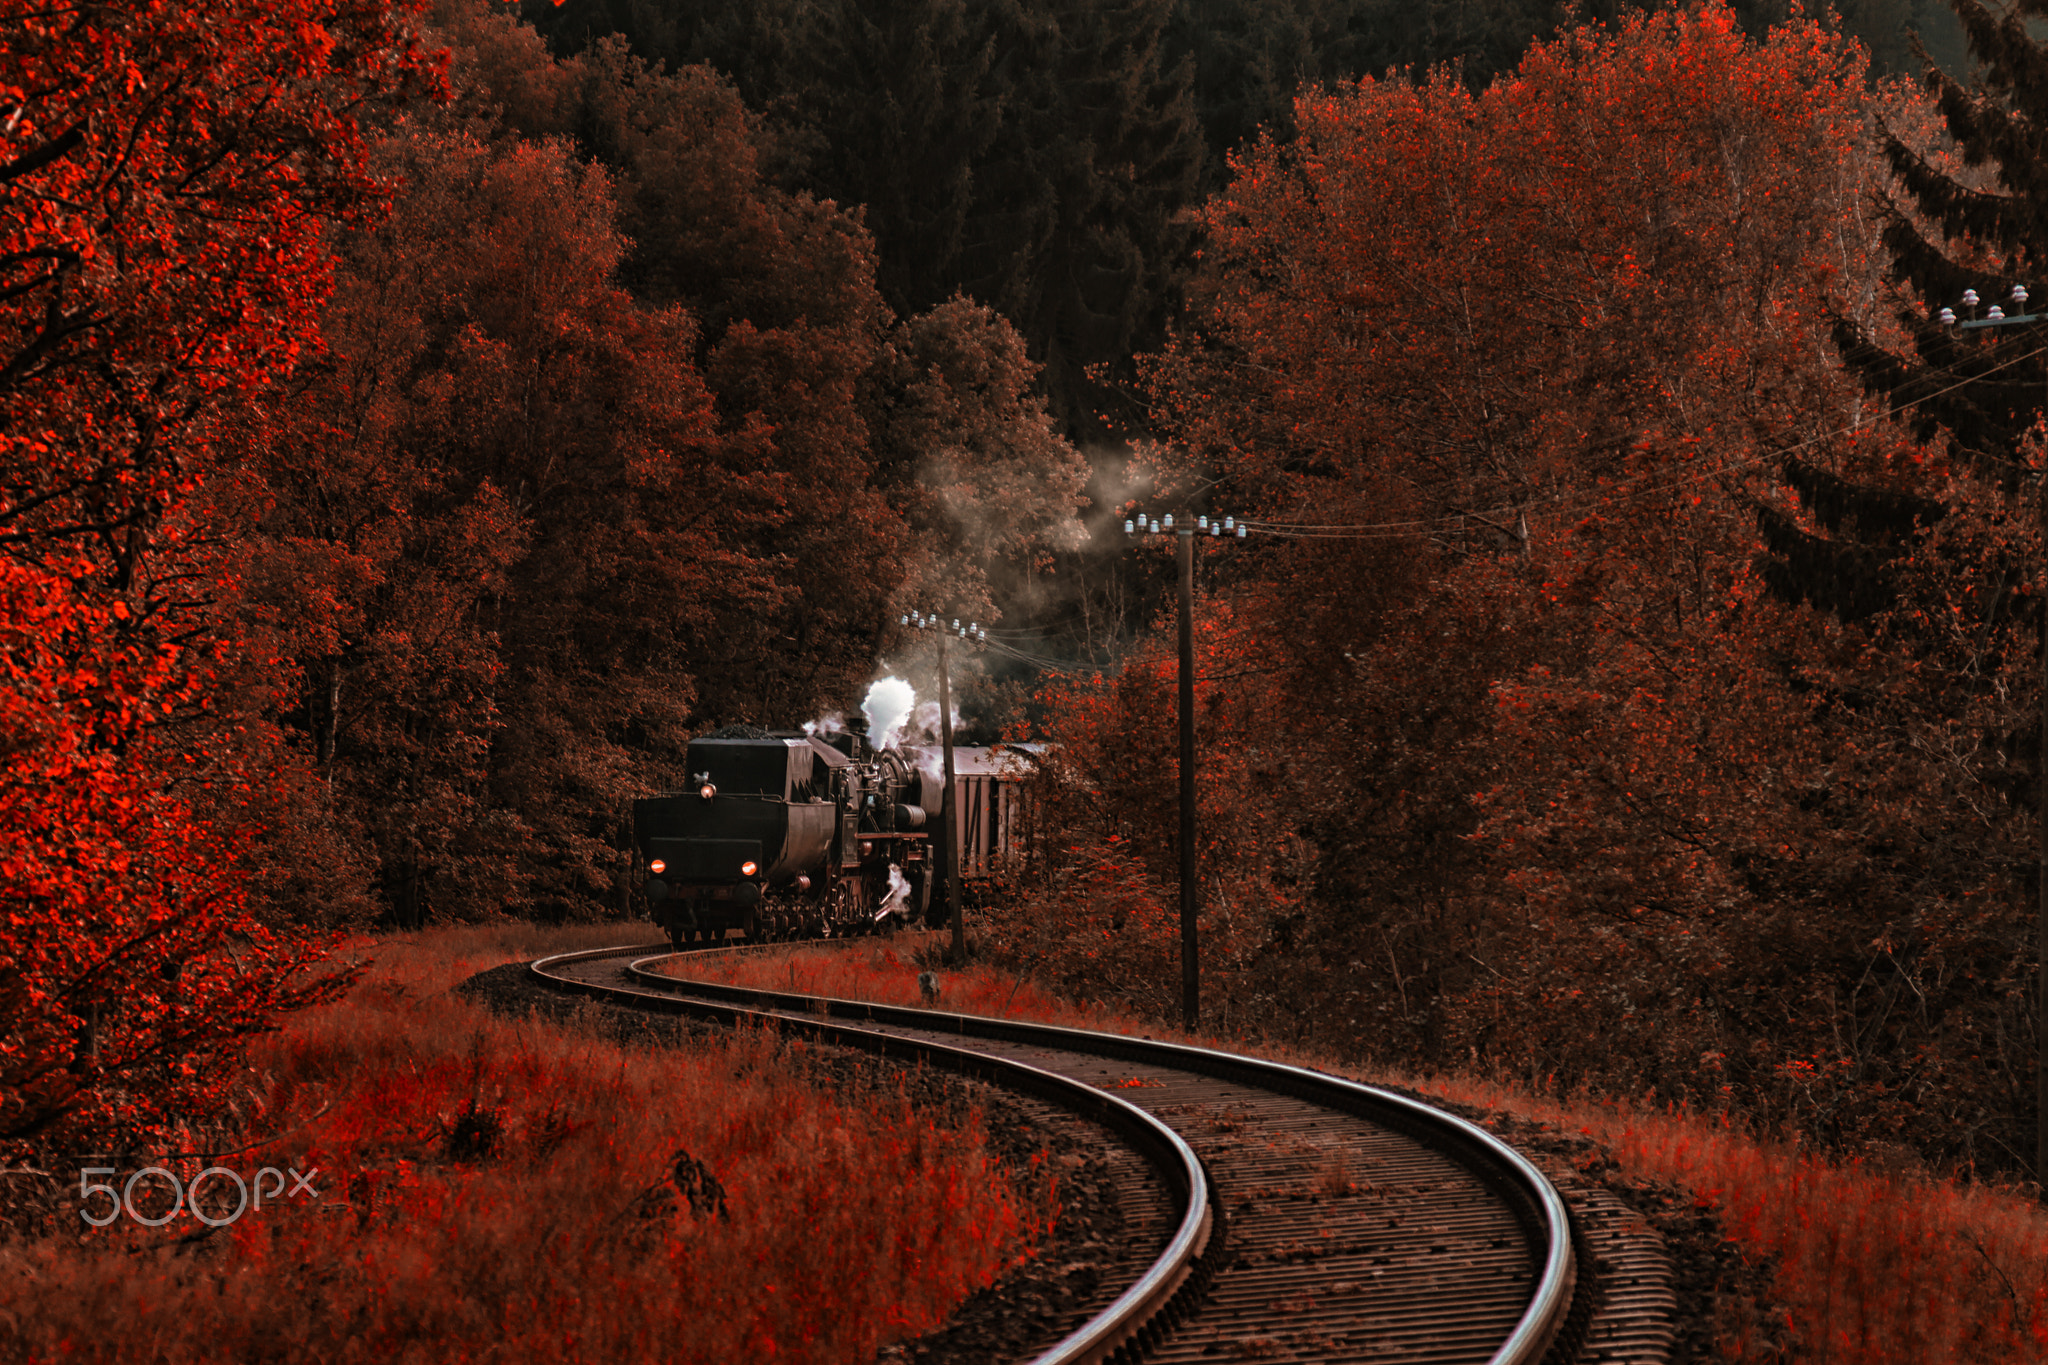 Niko Angelopoulos, Red, Nature, Landscape, 500px, Railway, Train, Trees, Vehicle Wallpaper